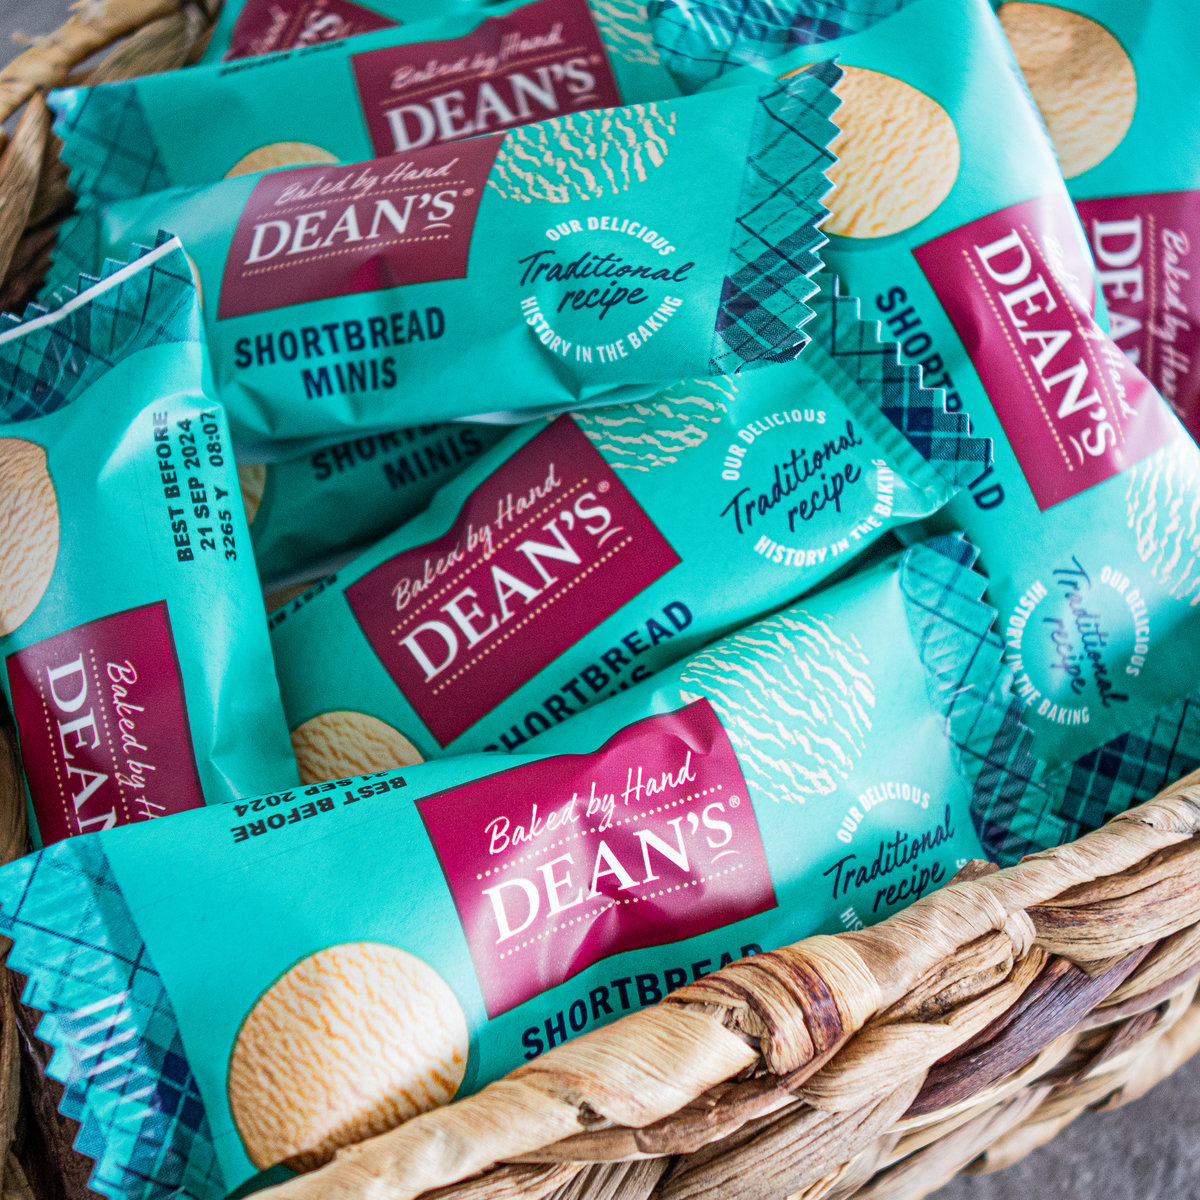 Buy the Shortbread Minis 20g x 80 online at Dean's of Huntly Ltd